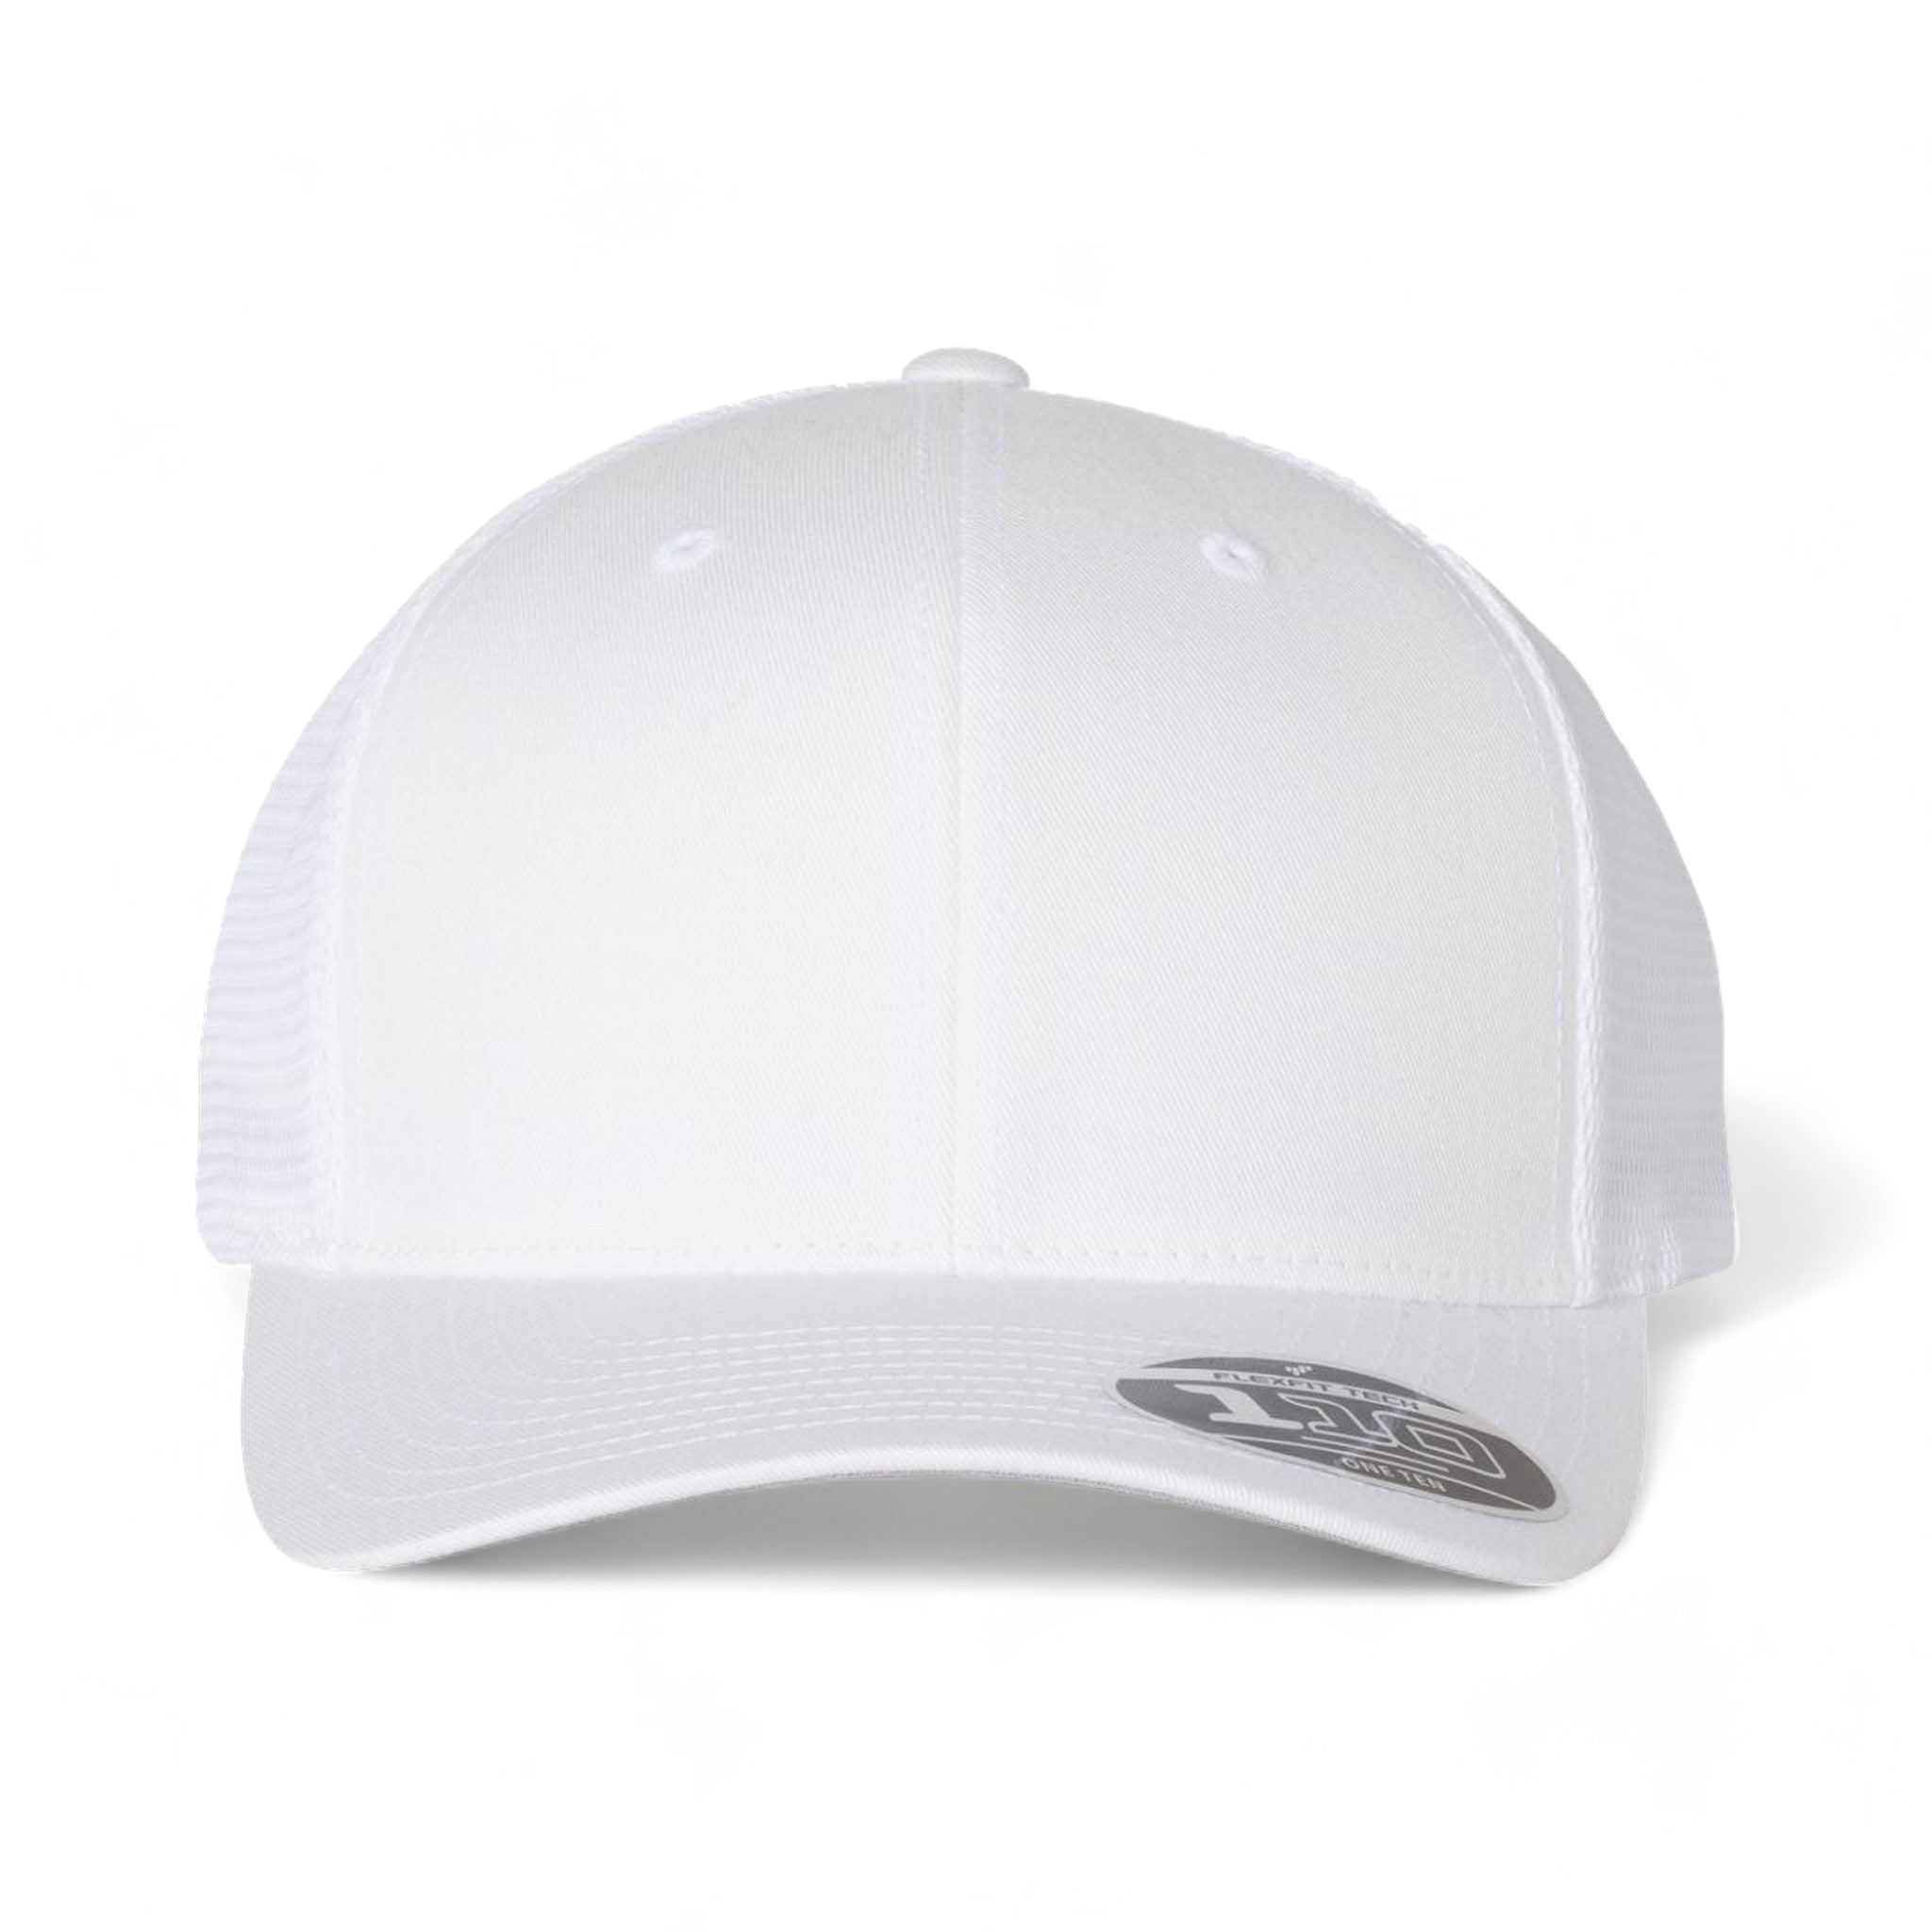 Front view of Flexfit 110M custom hat in white